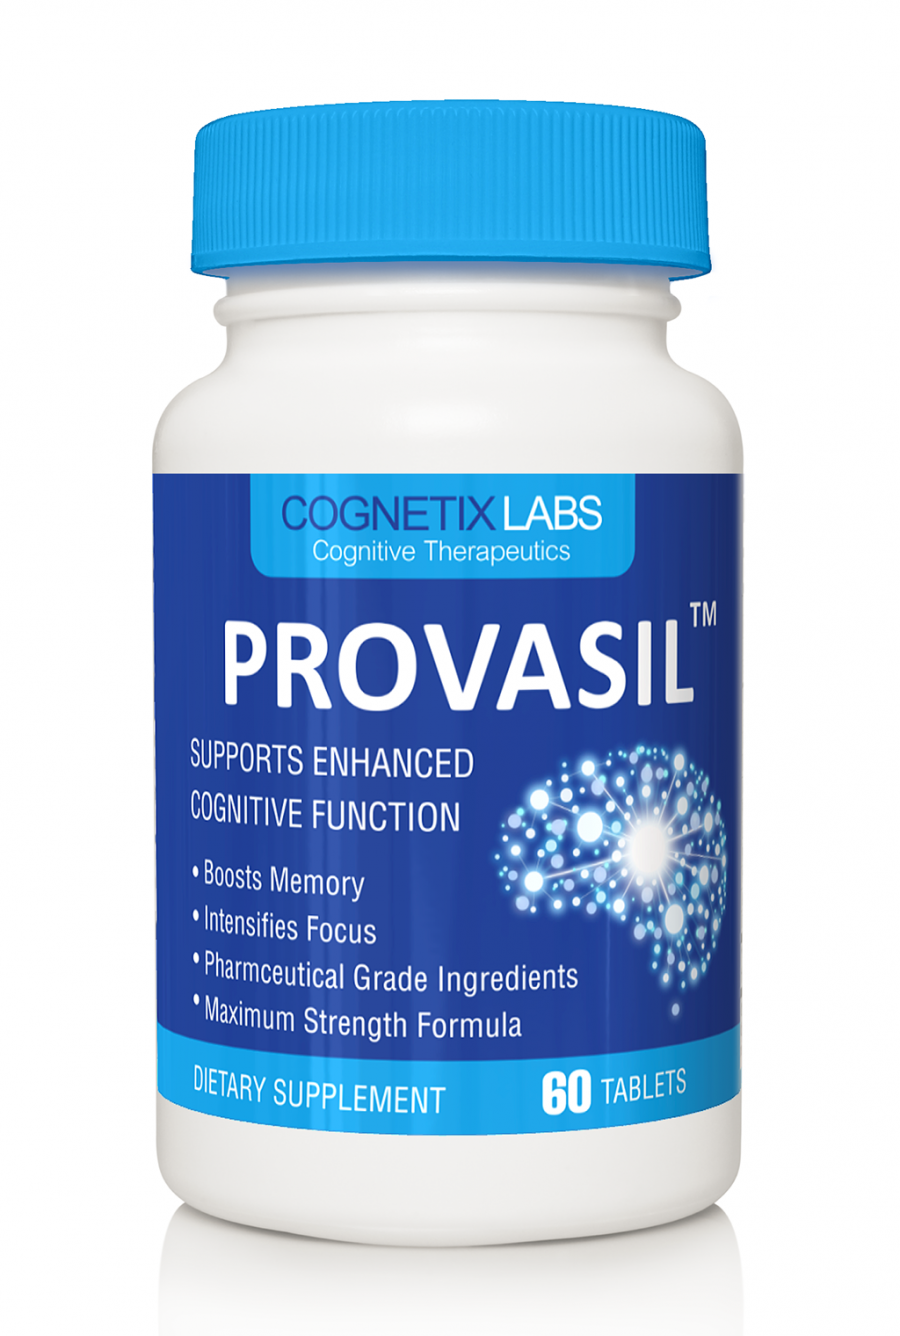 Provasil Review: Can A Daily Pill Of Provasil Really Boost Your Brain Power?